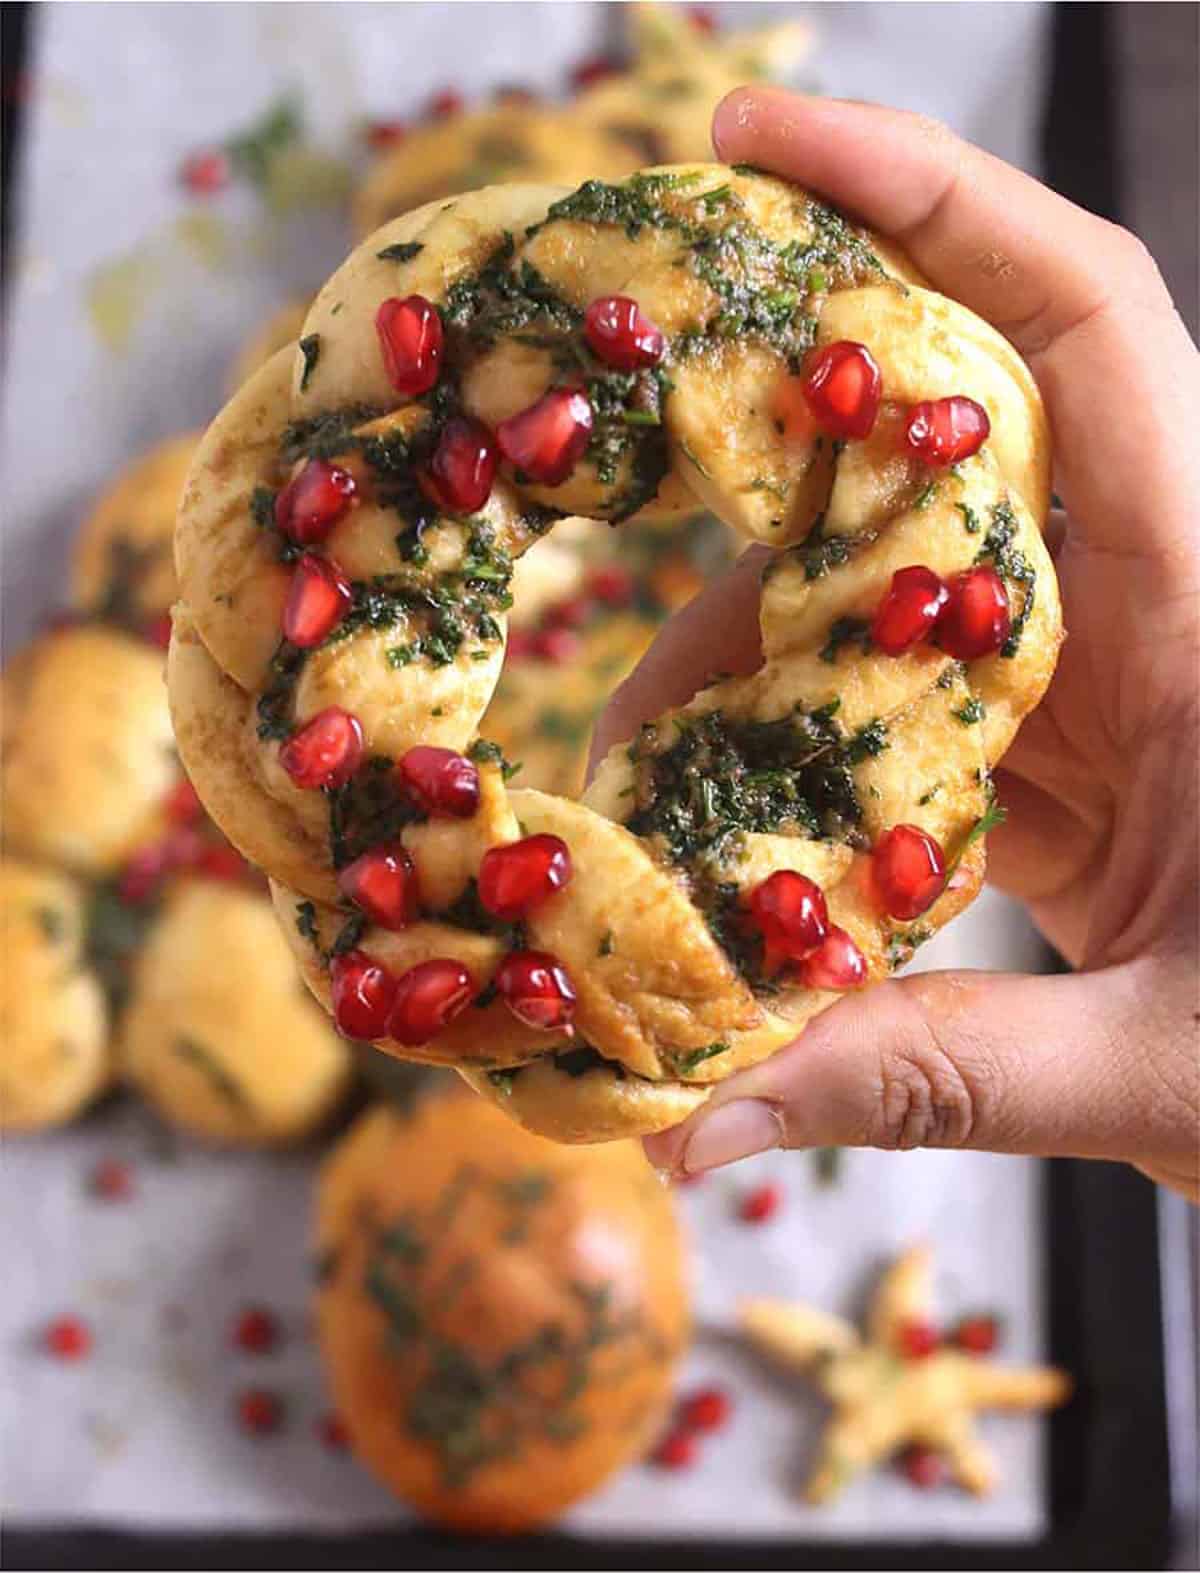 Holding Christmas Wreath Pull Apart Bread, Holiday themed Bread 